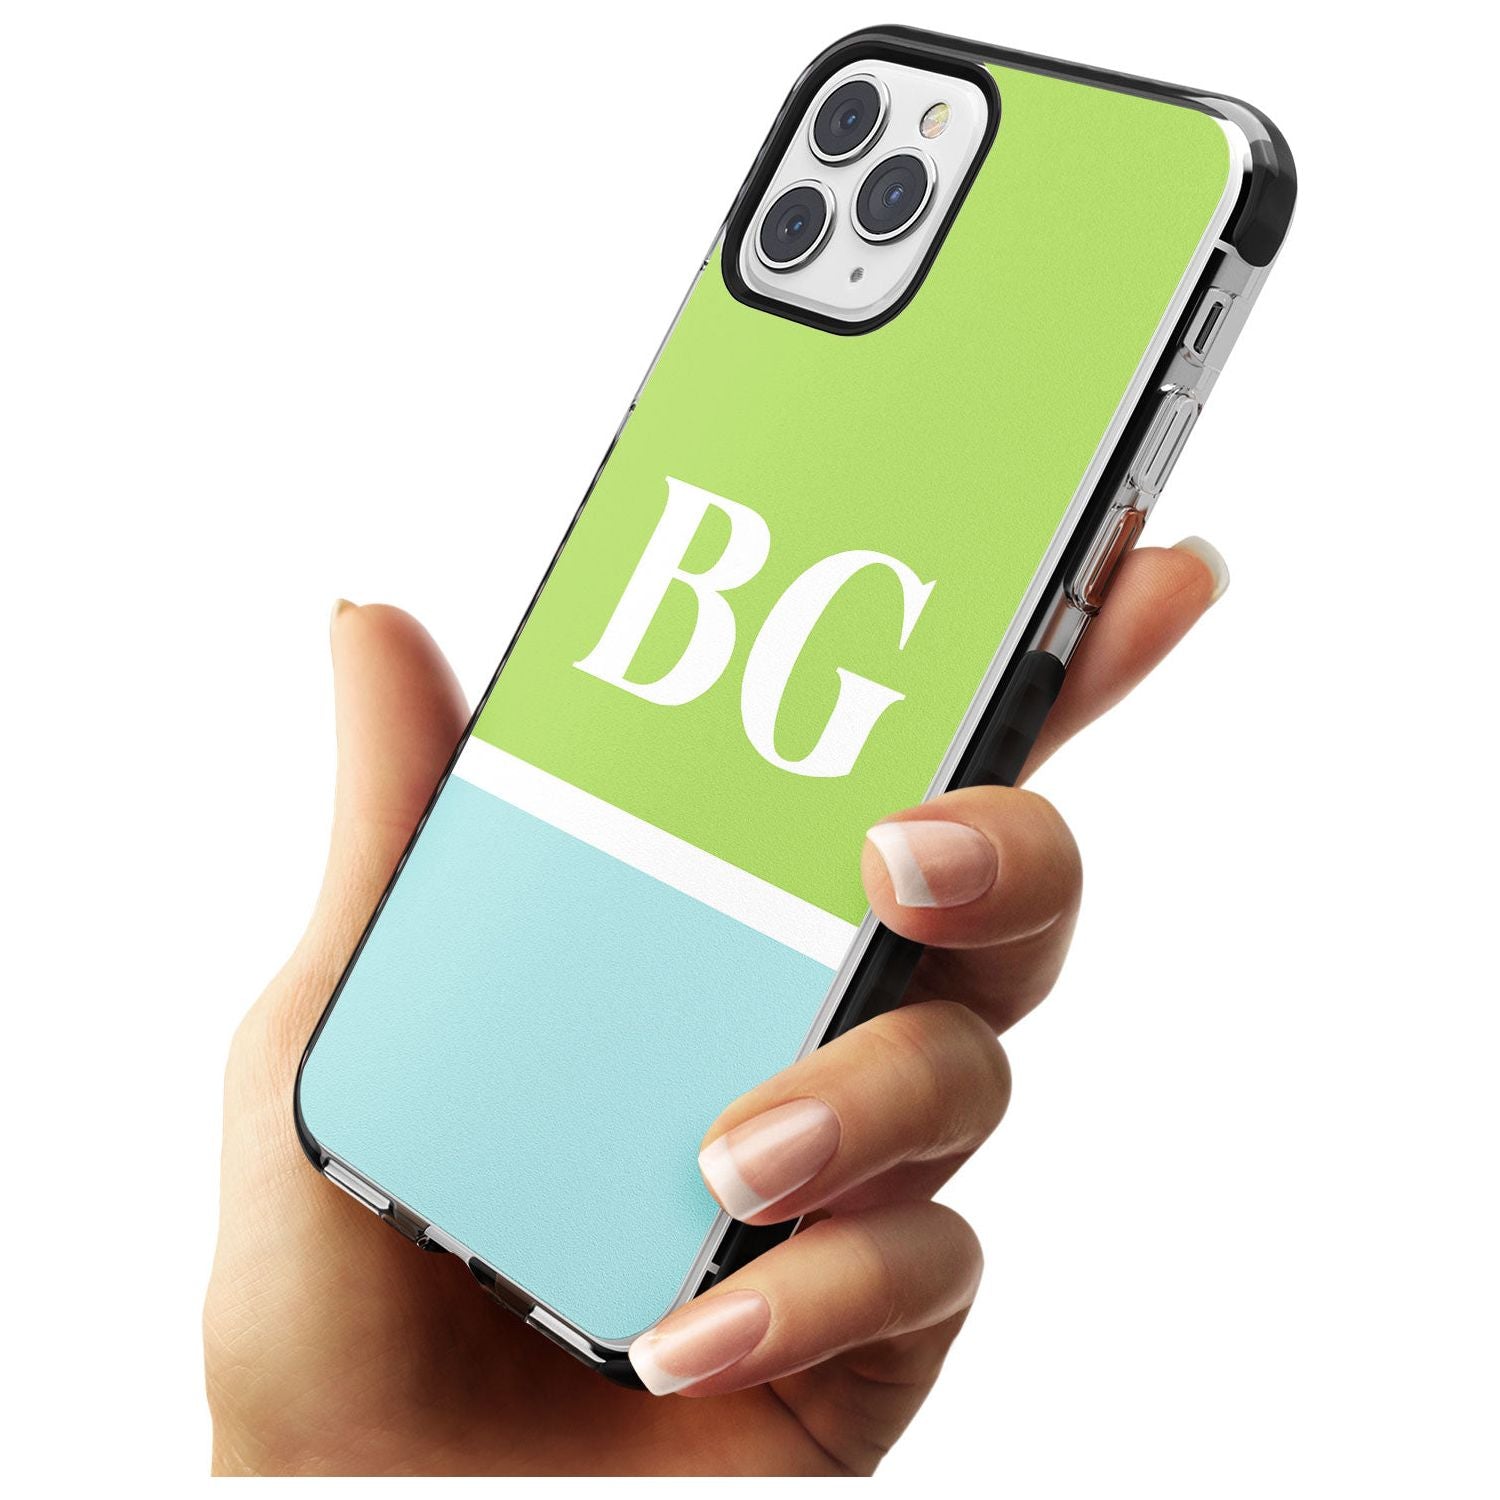 Colourblock: Green & Turquoise Black Impact Phone Case for iPhone 11 Pro Max